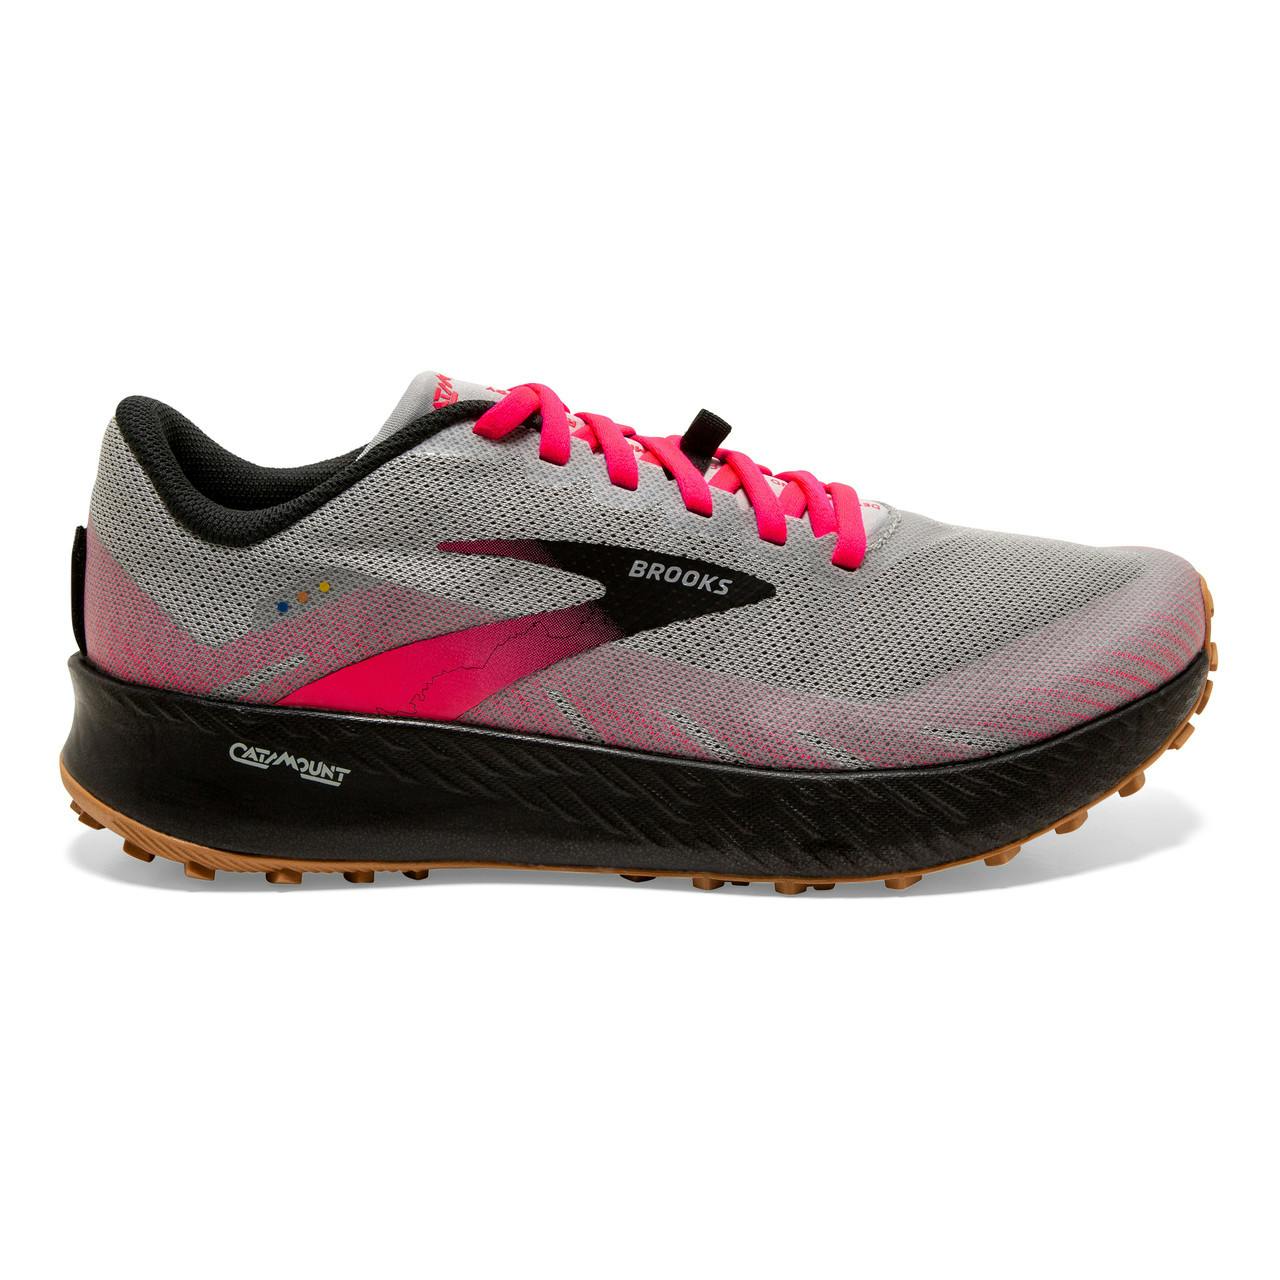 Catamount Trail Running Shoes Alloy/Pink/Black